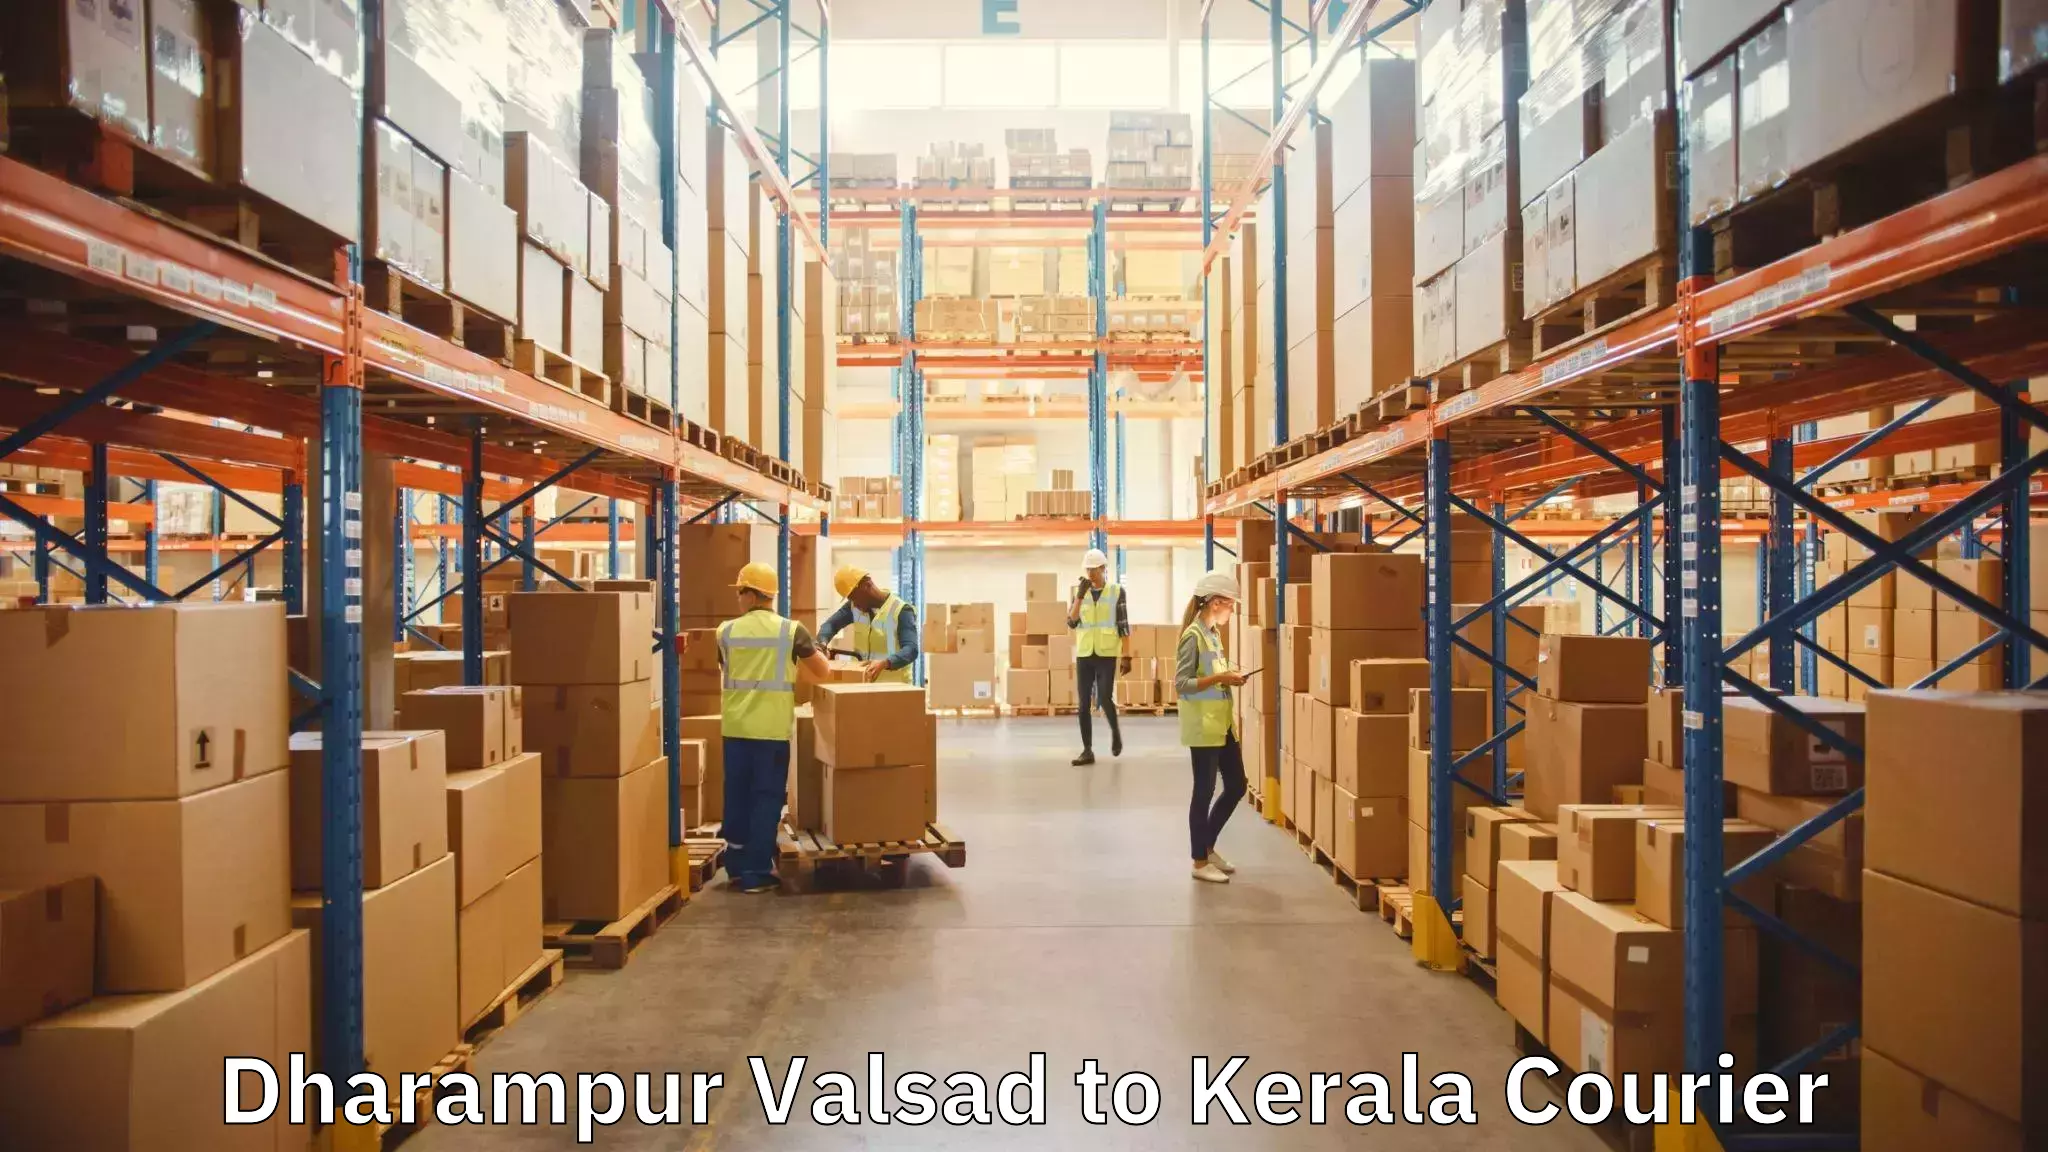 Furniture moving specialists Dharampur Valsad to Cochin Port Kochi